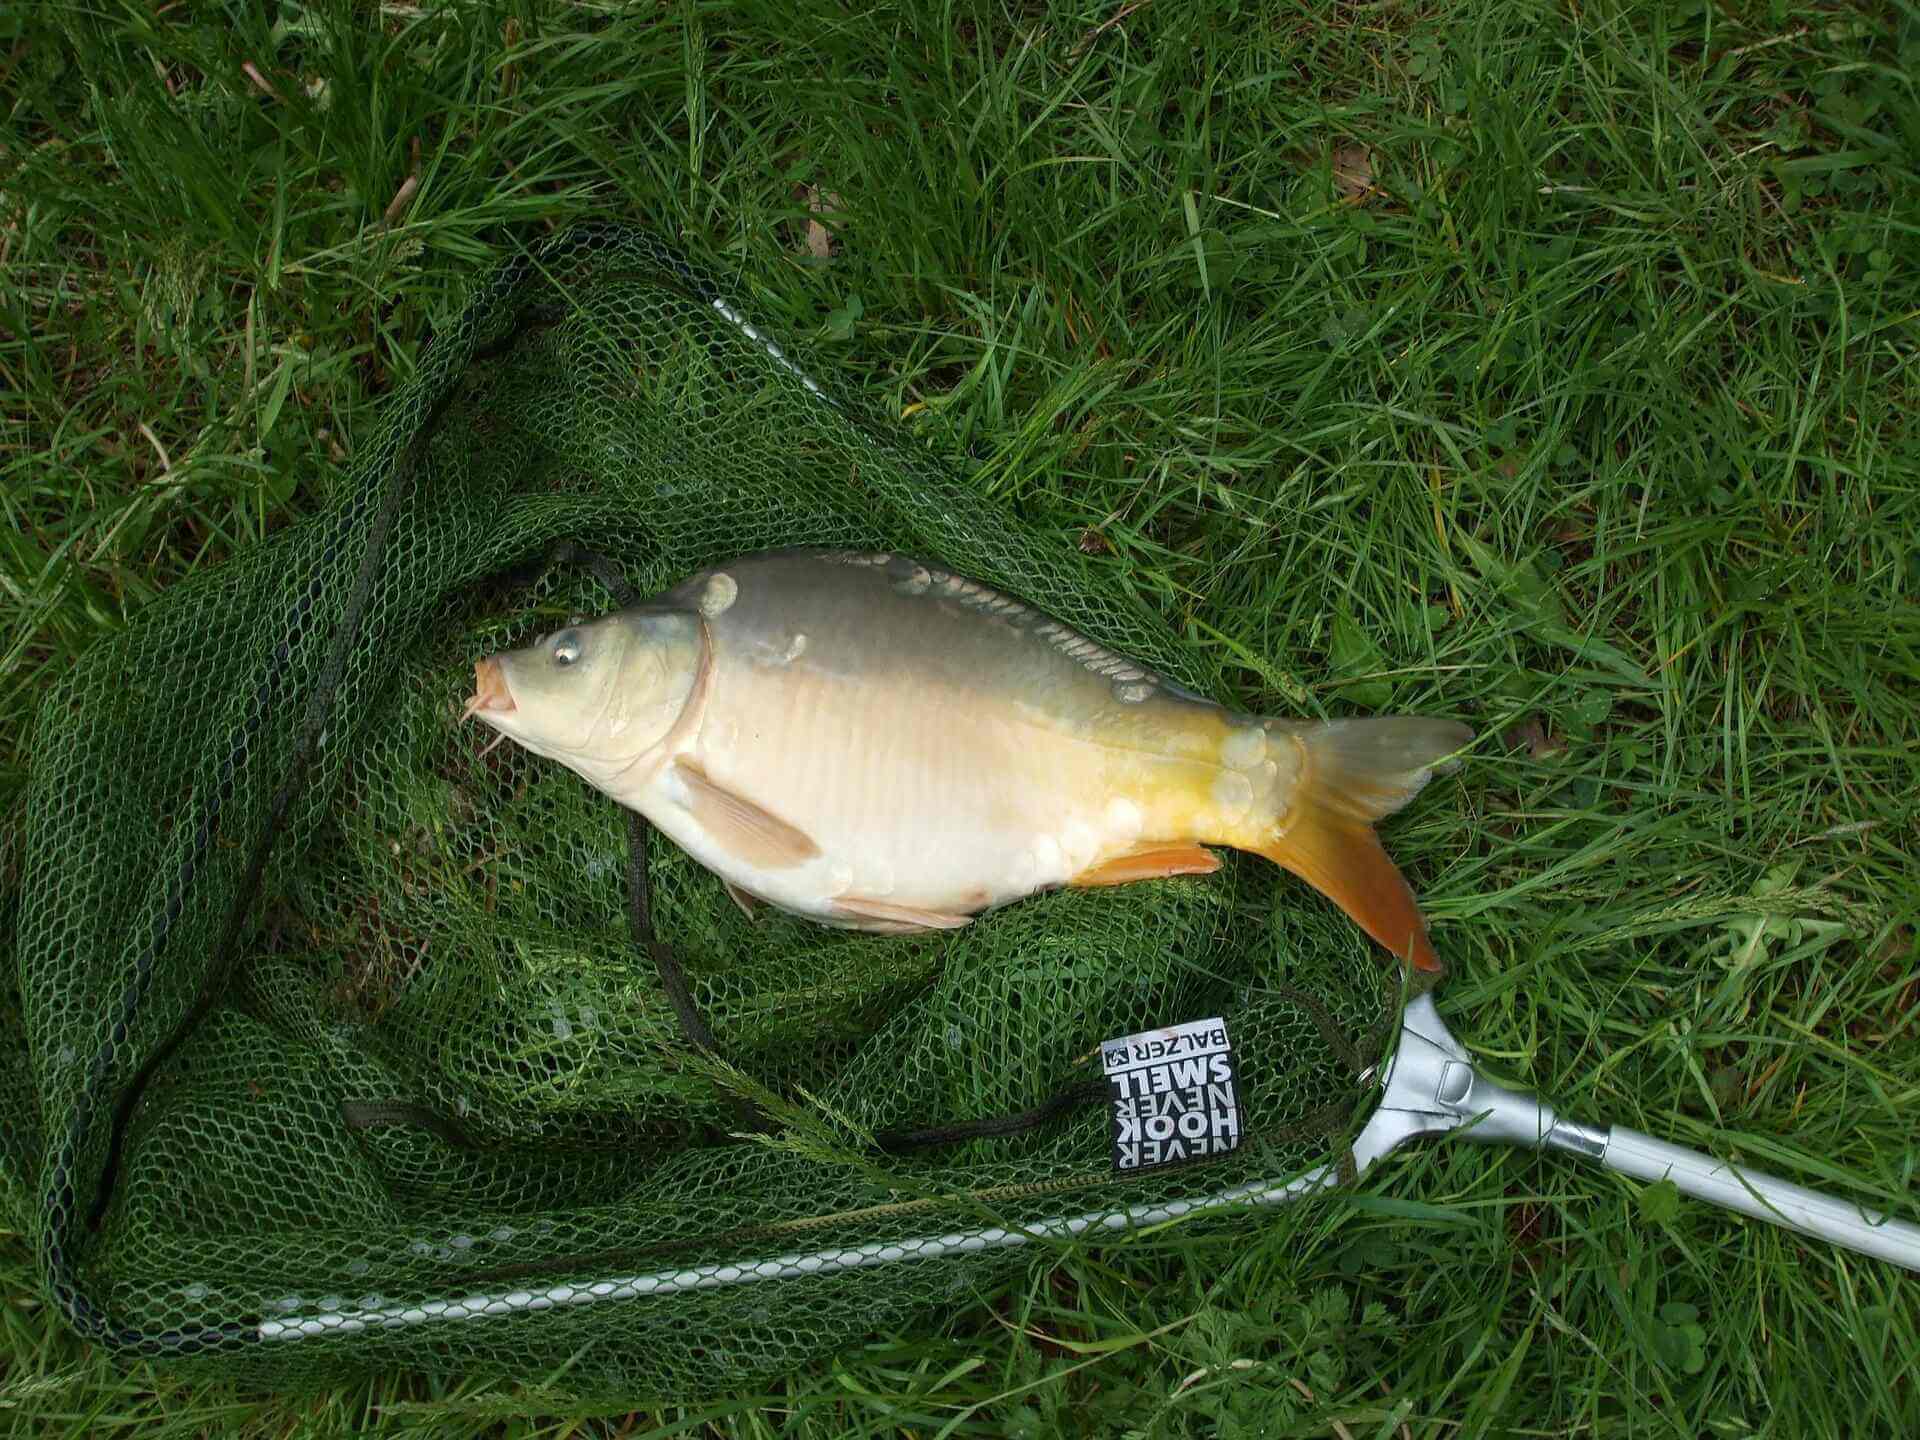 A common carp caught in a net